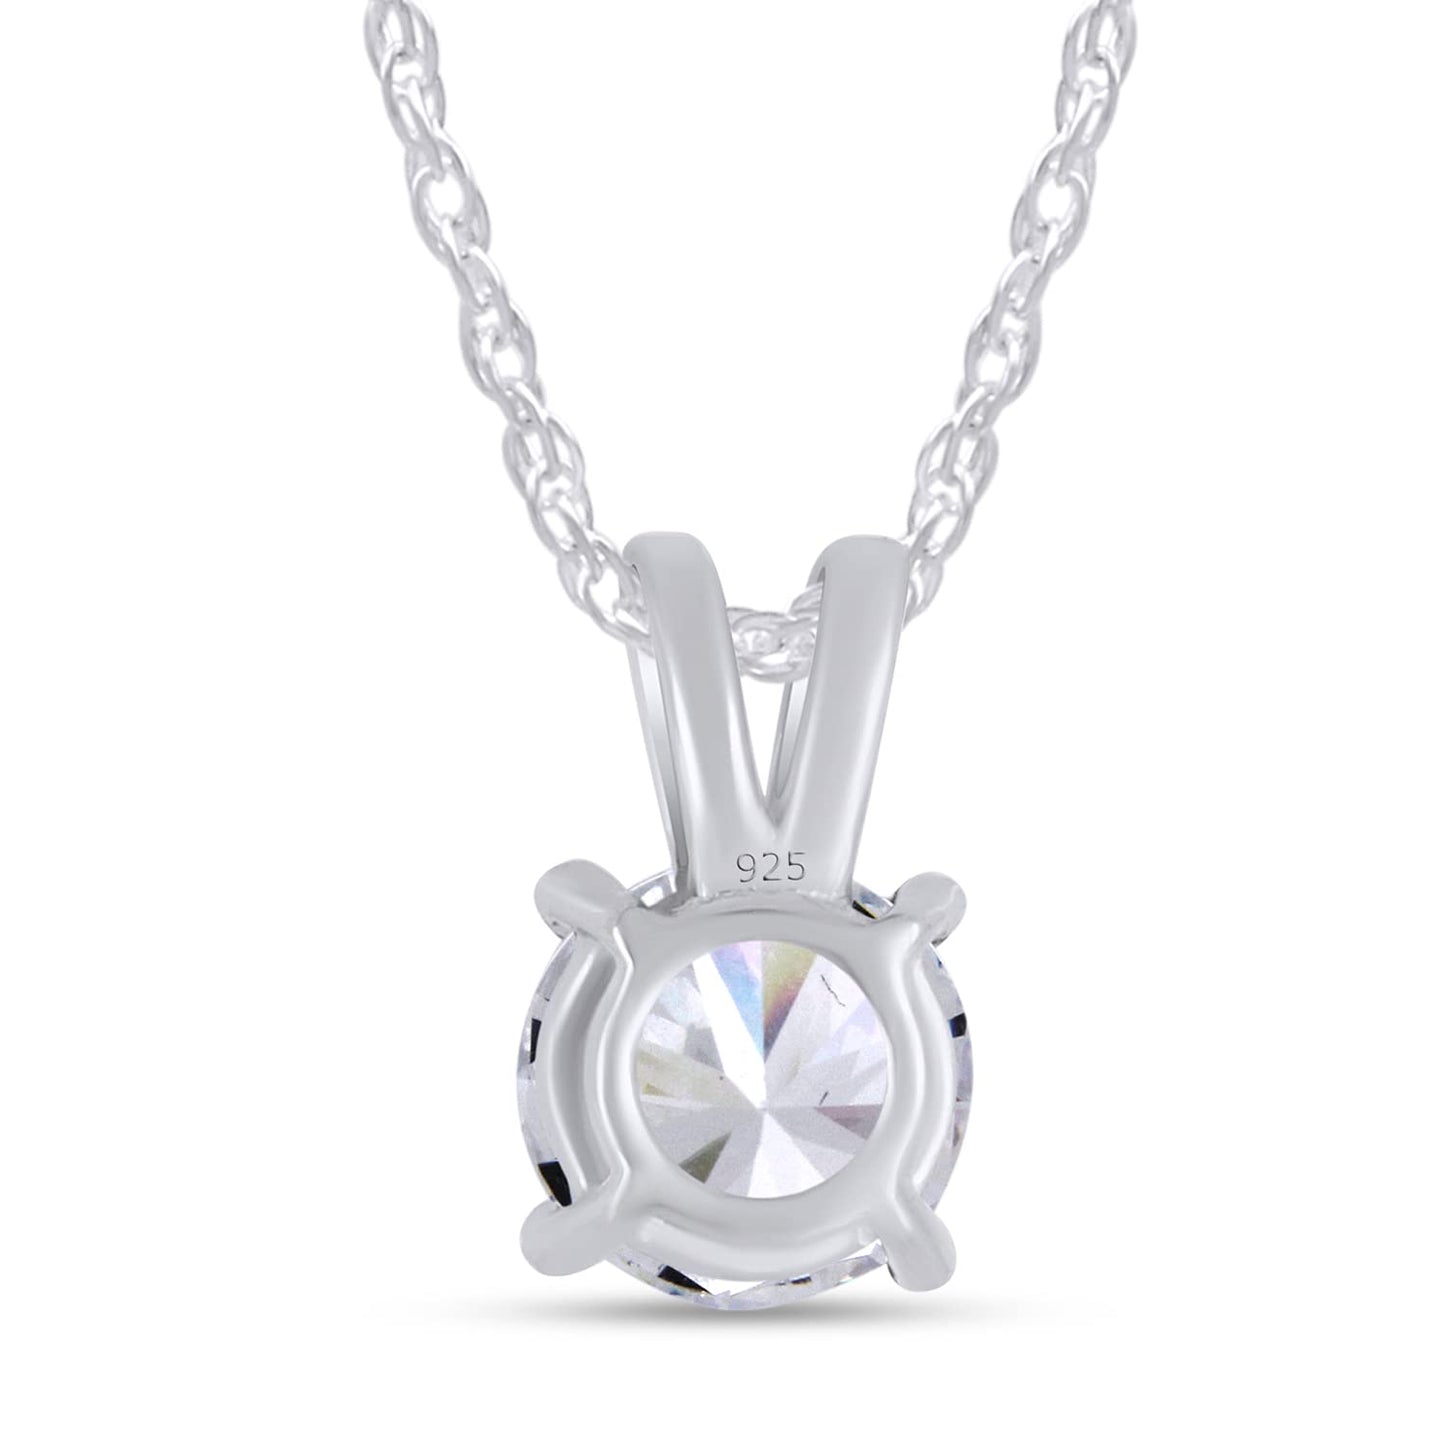 3.5MM to 6MM Round Cut Lab Created Moissanite Diamond Solitaire Pendant Necklace In 925 Sterling Silver (0.16 to 0.75 Cttw)